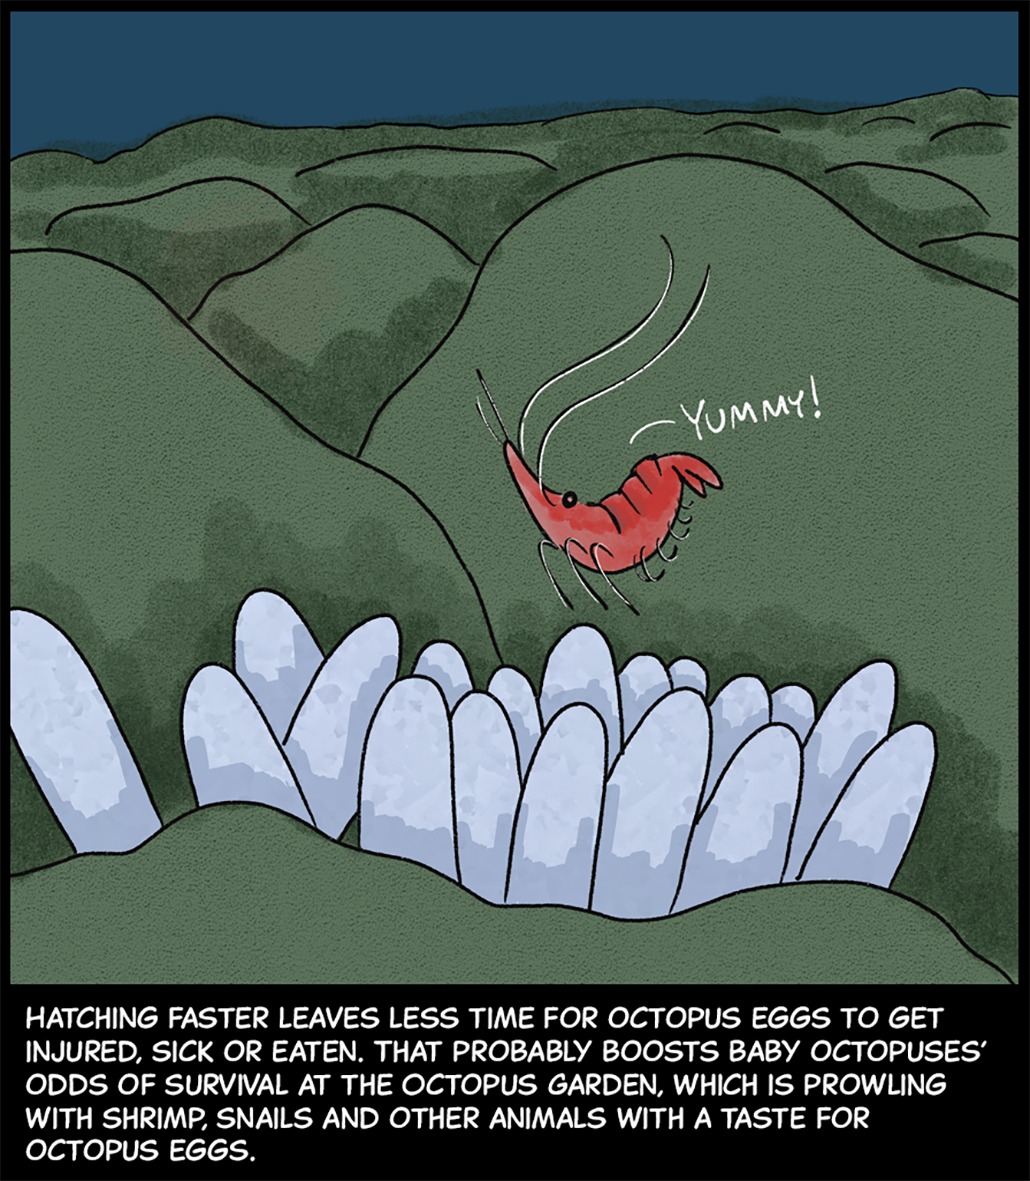 Image: A cluster of octopus eggs sits exposed on the seafloor. A red shrimp hovers near the eggs, ready to attack. A speech bubble coming from the shrimp says, “Yummy!” Text (below image): Hatching faster leaves less time for octopus eggs to get injured, sick or eaten. That probably boosts baby octopuses’ odds of survival at the Octopus Garden, which is prowling with shrimp, snails and other animals with a taste for octopus eggs. 